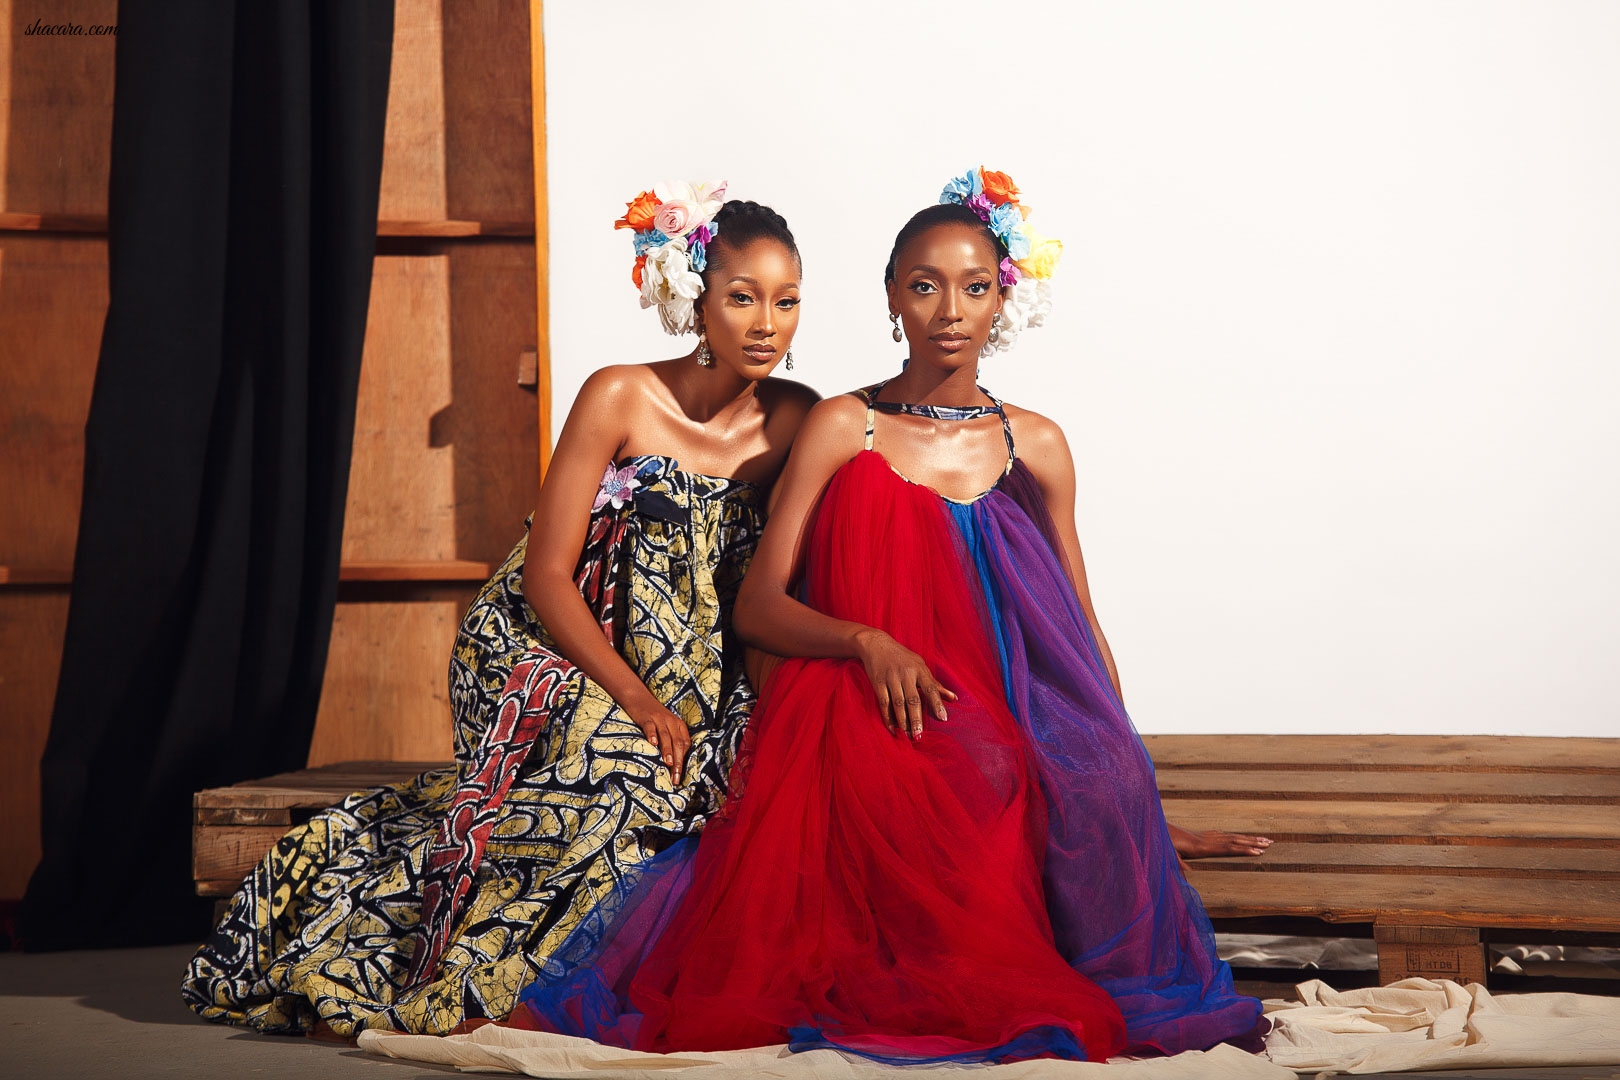 Aisha Abu Bakr Draws Inspiration From “The Northern Star” In Resort ’19 Collection